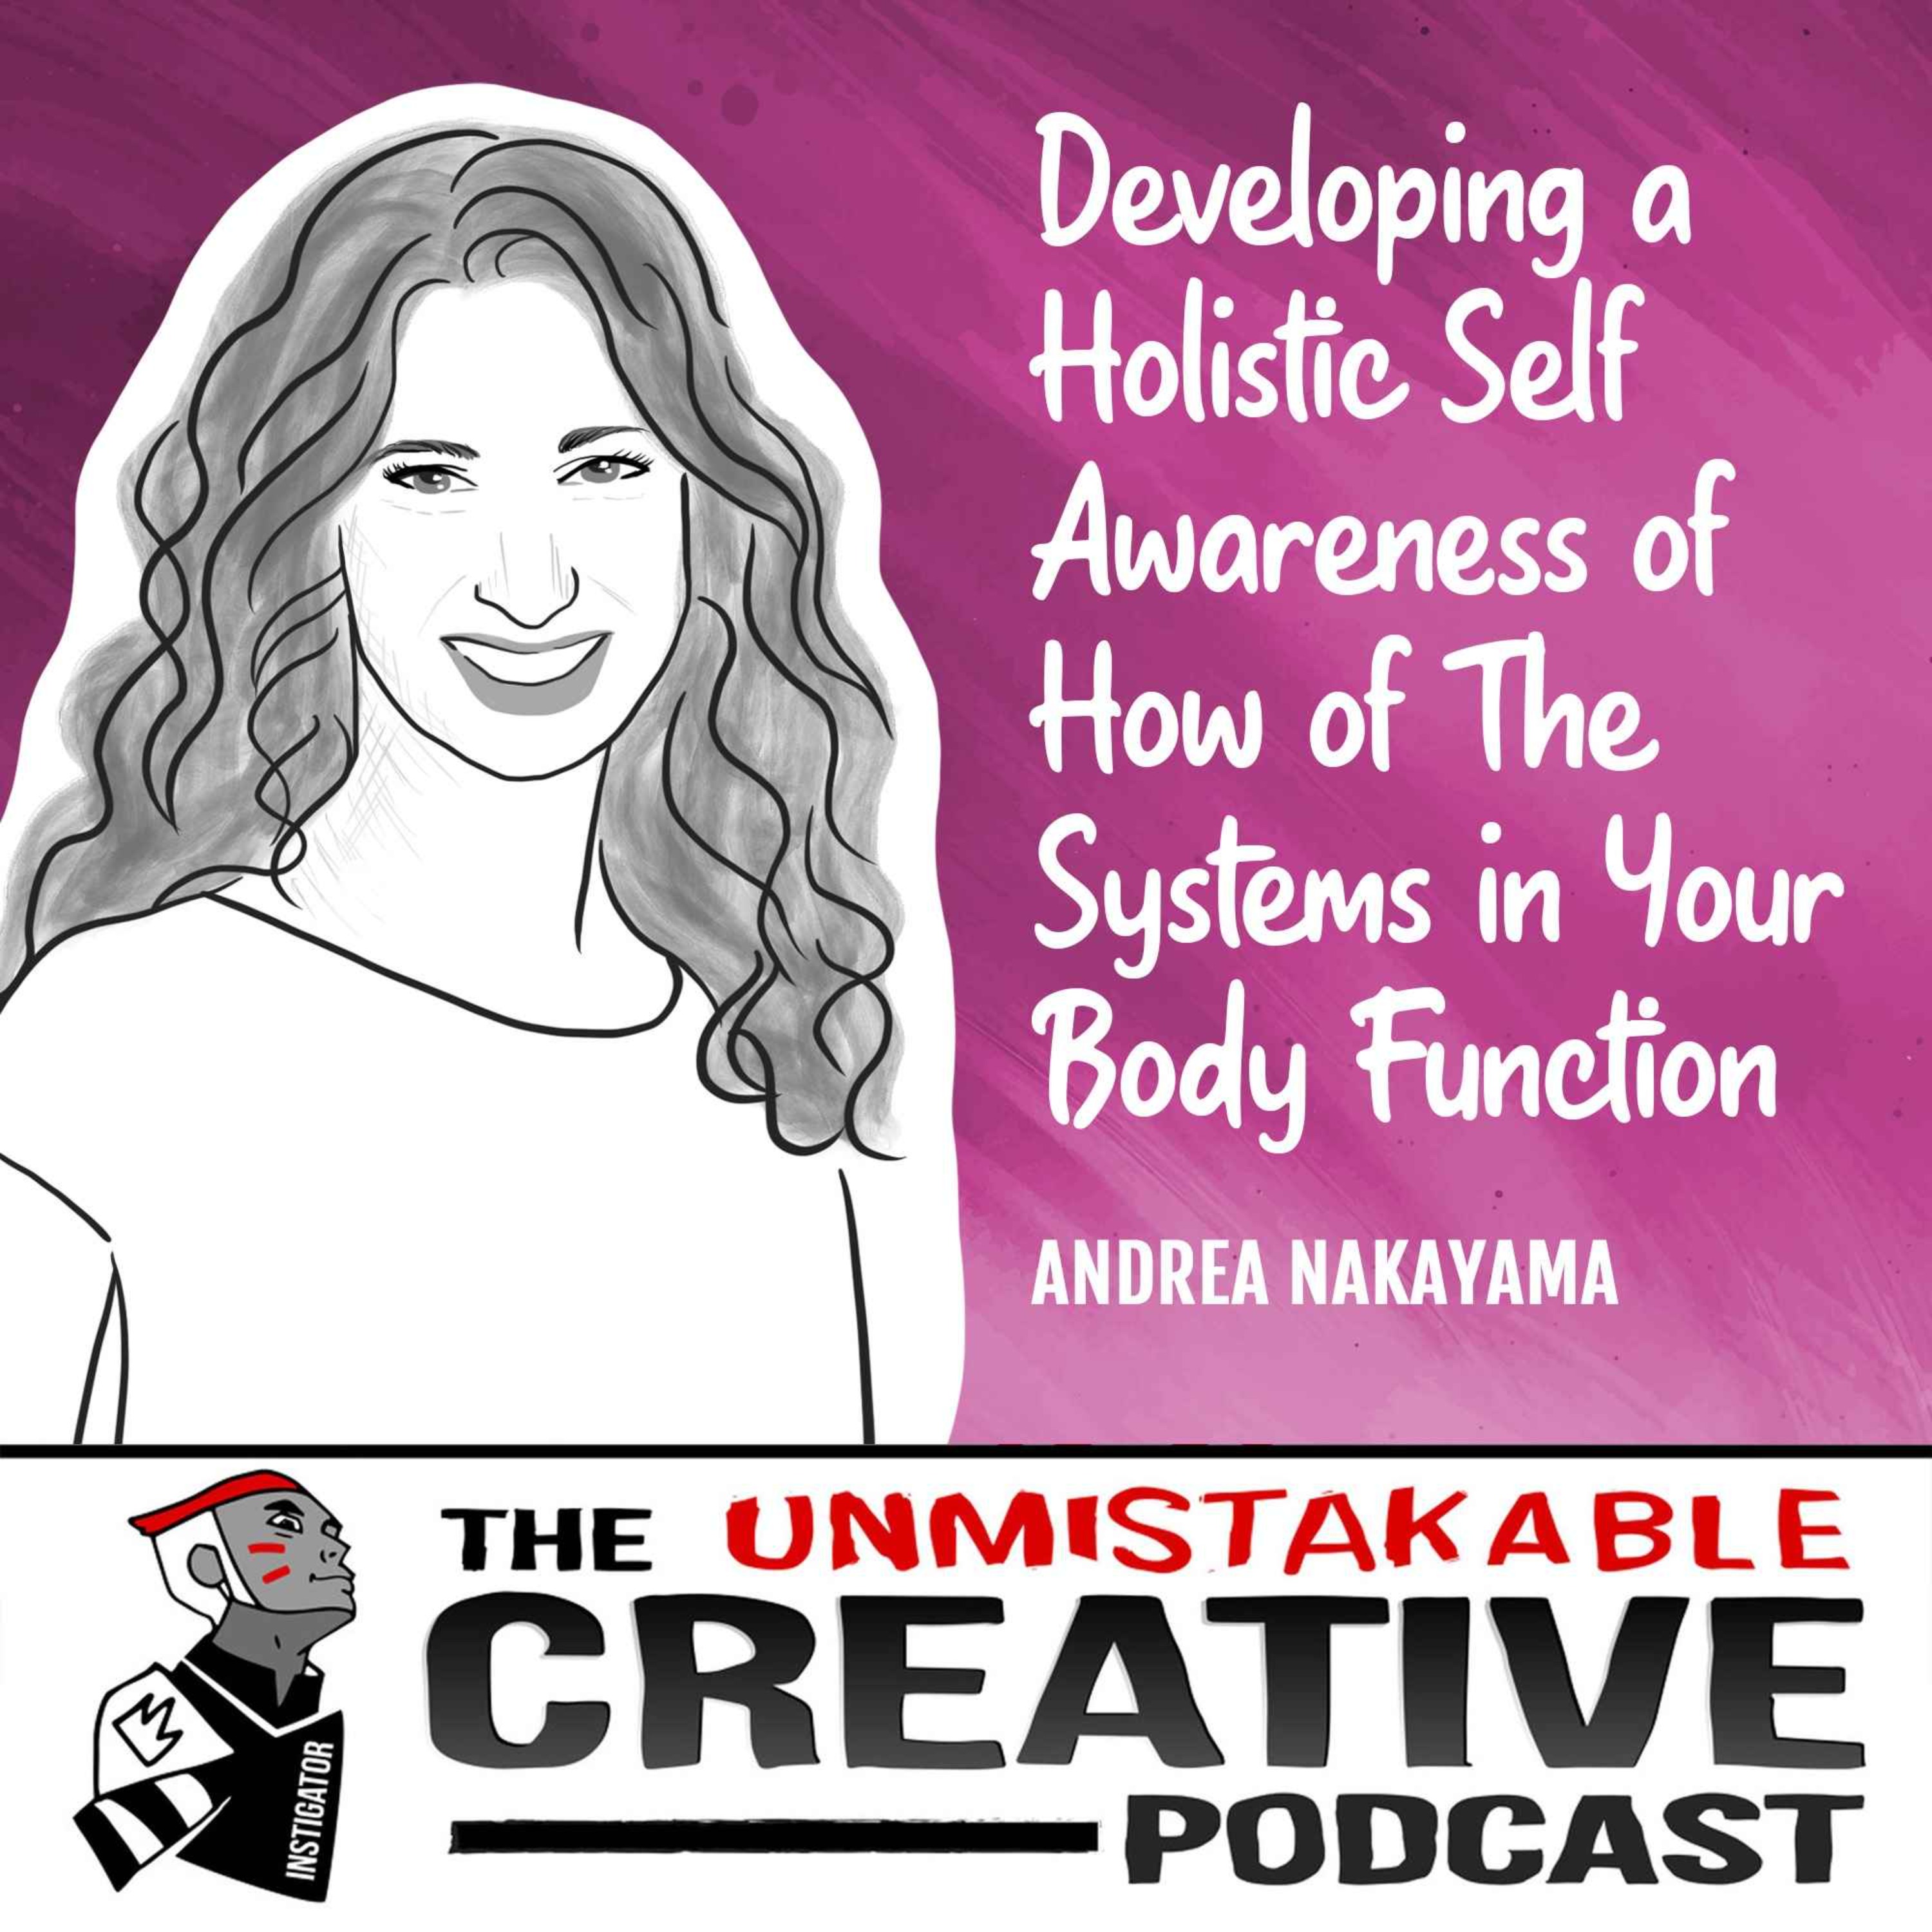 Andrea Nakayama | Developing a Holistic Self Awareness of How of The Systems in Your Body Function